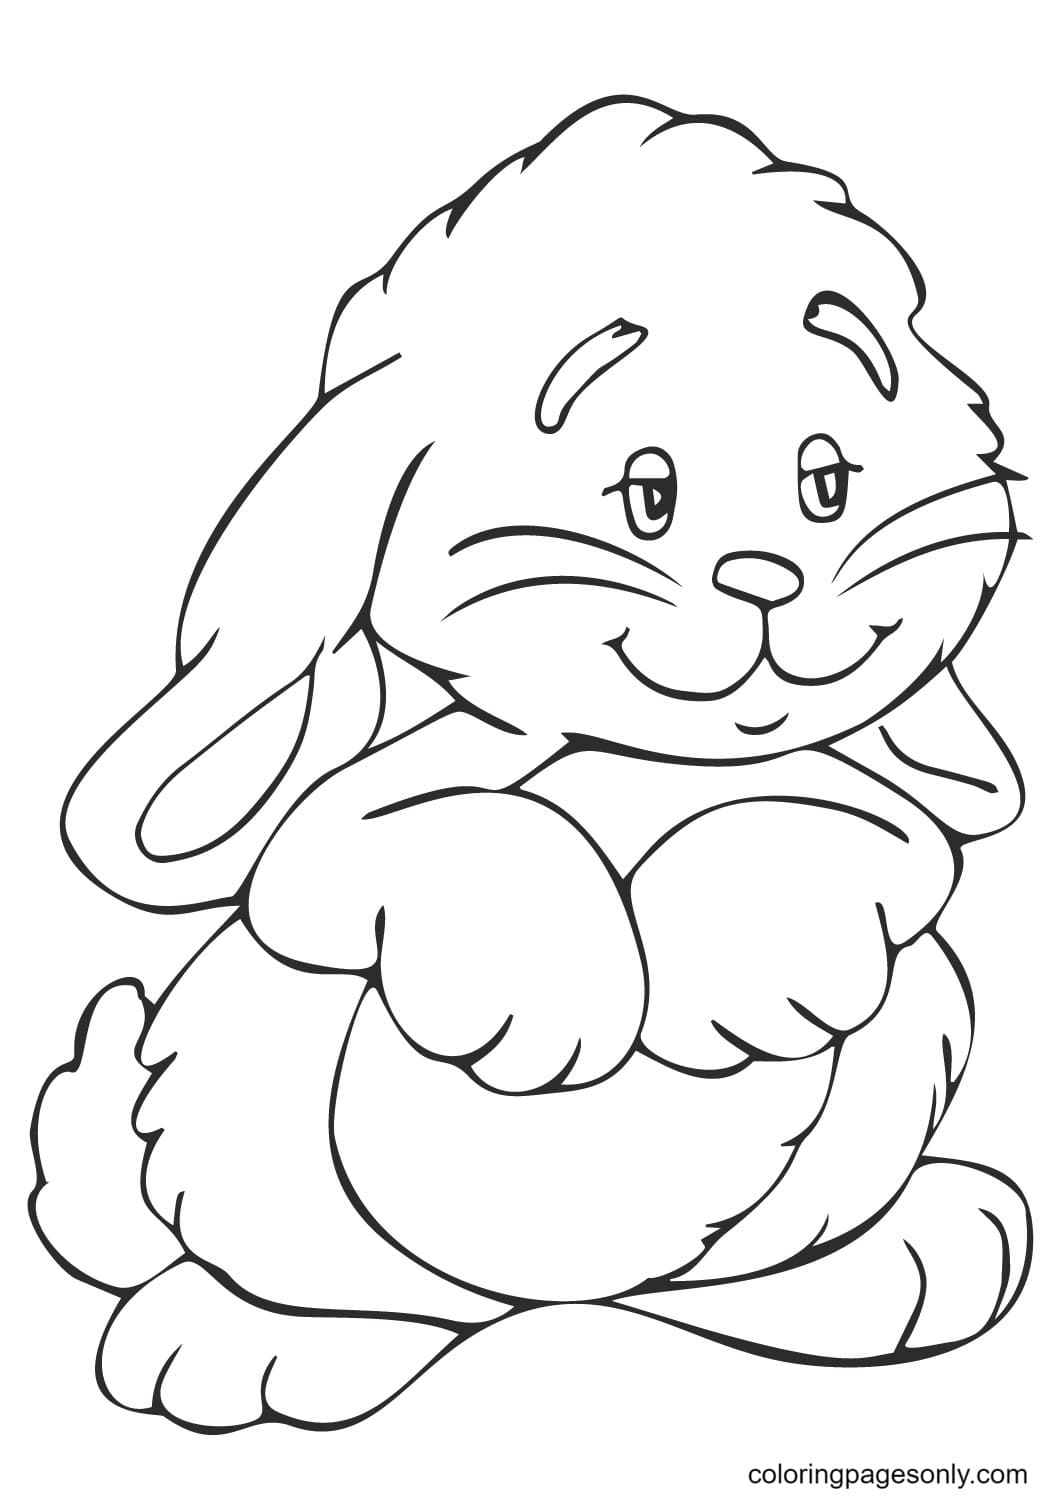 Lovely Bunnies Coloring Page